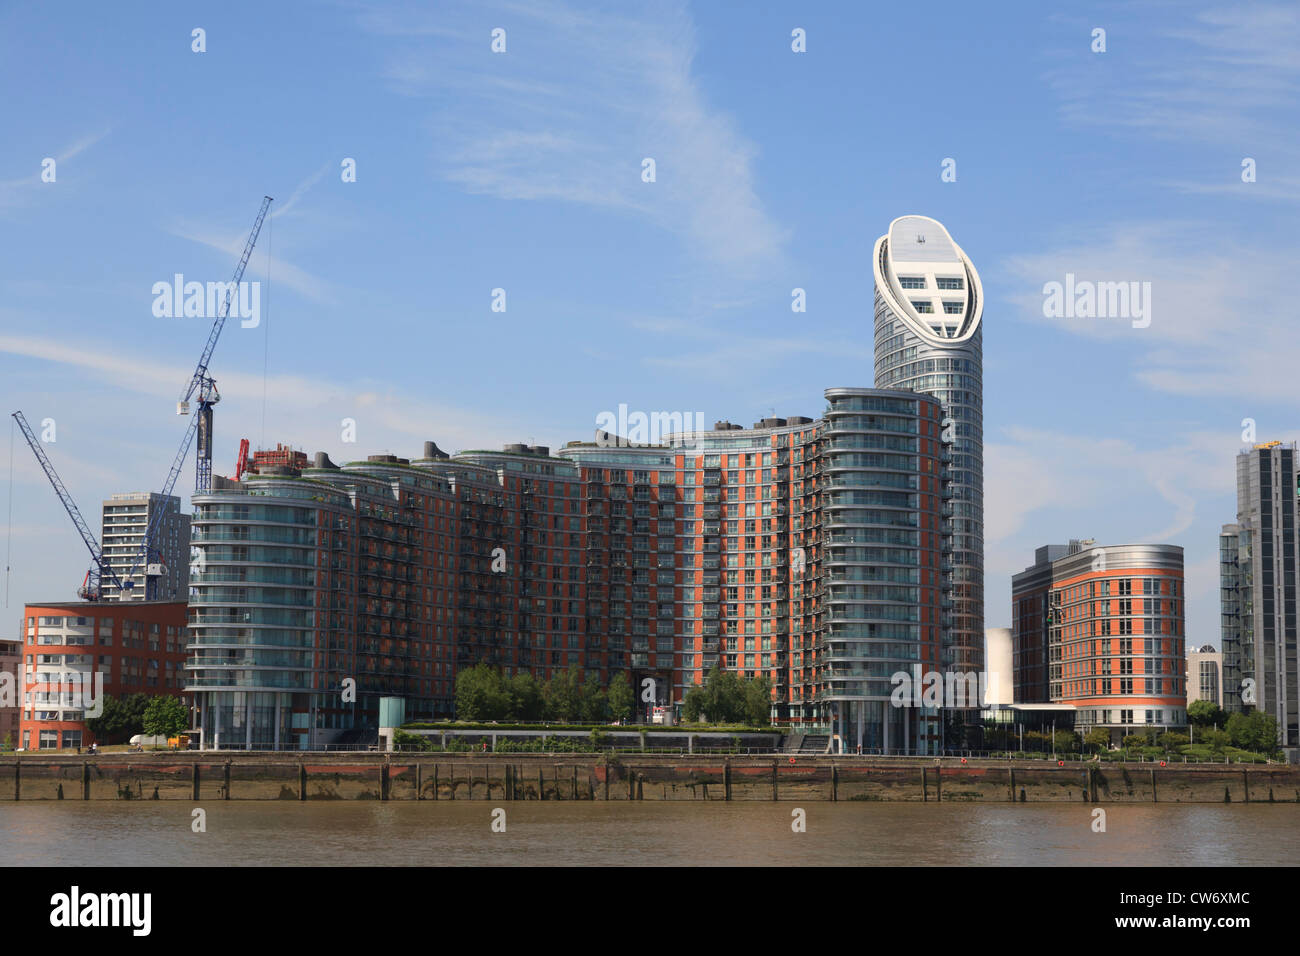 Ontario Tower and New Providence Wharf residential properties in London's docklands Stock Photo